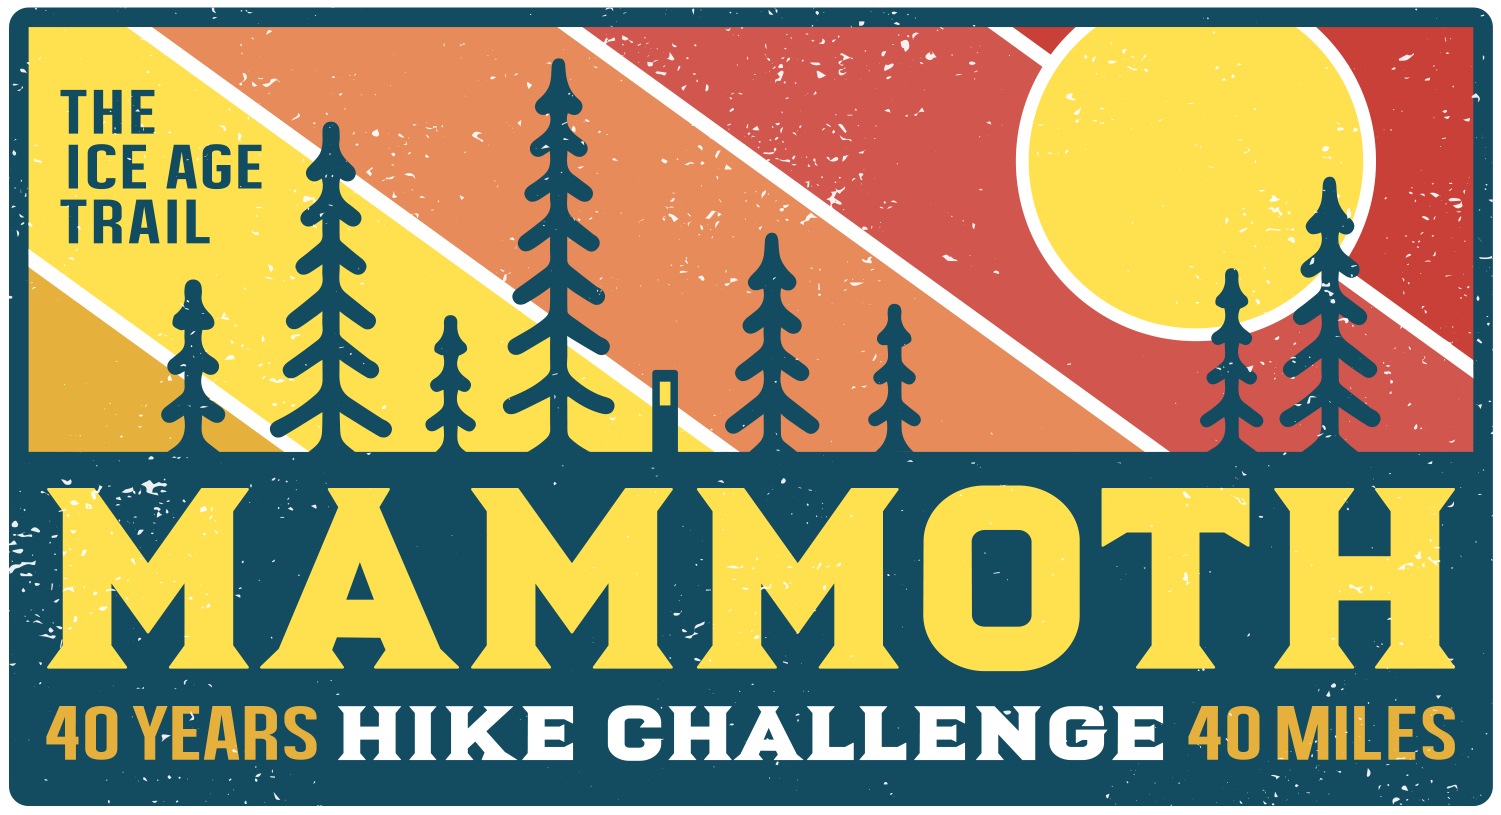 This patch will be given to participants of the Mammoth Hike Challenge who hike 40 miles of the Ice Age Trail in October.